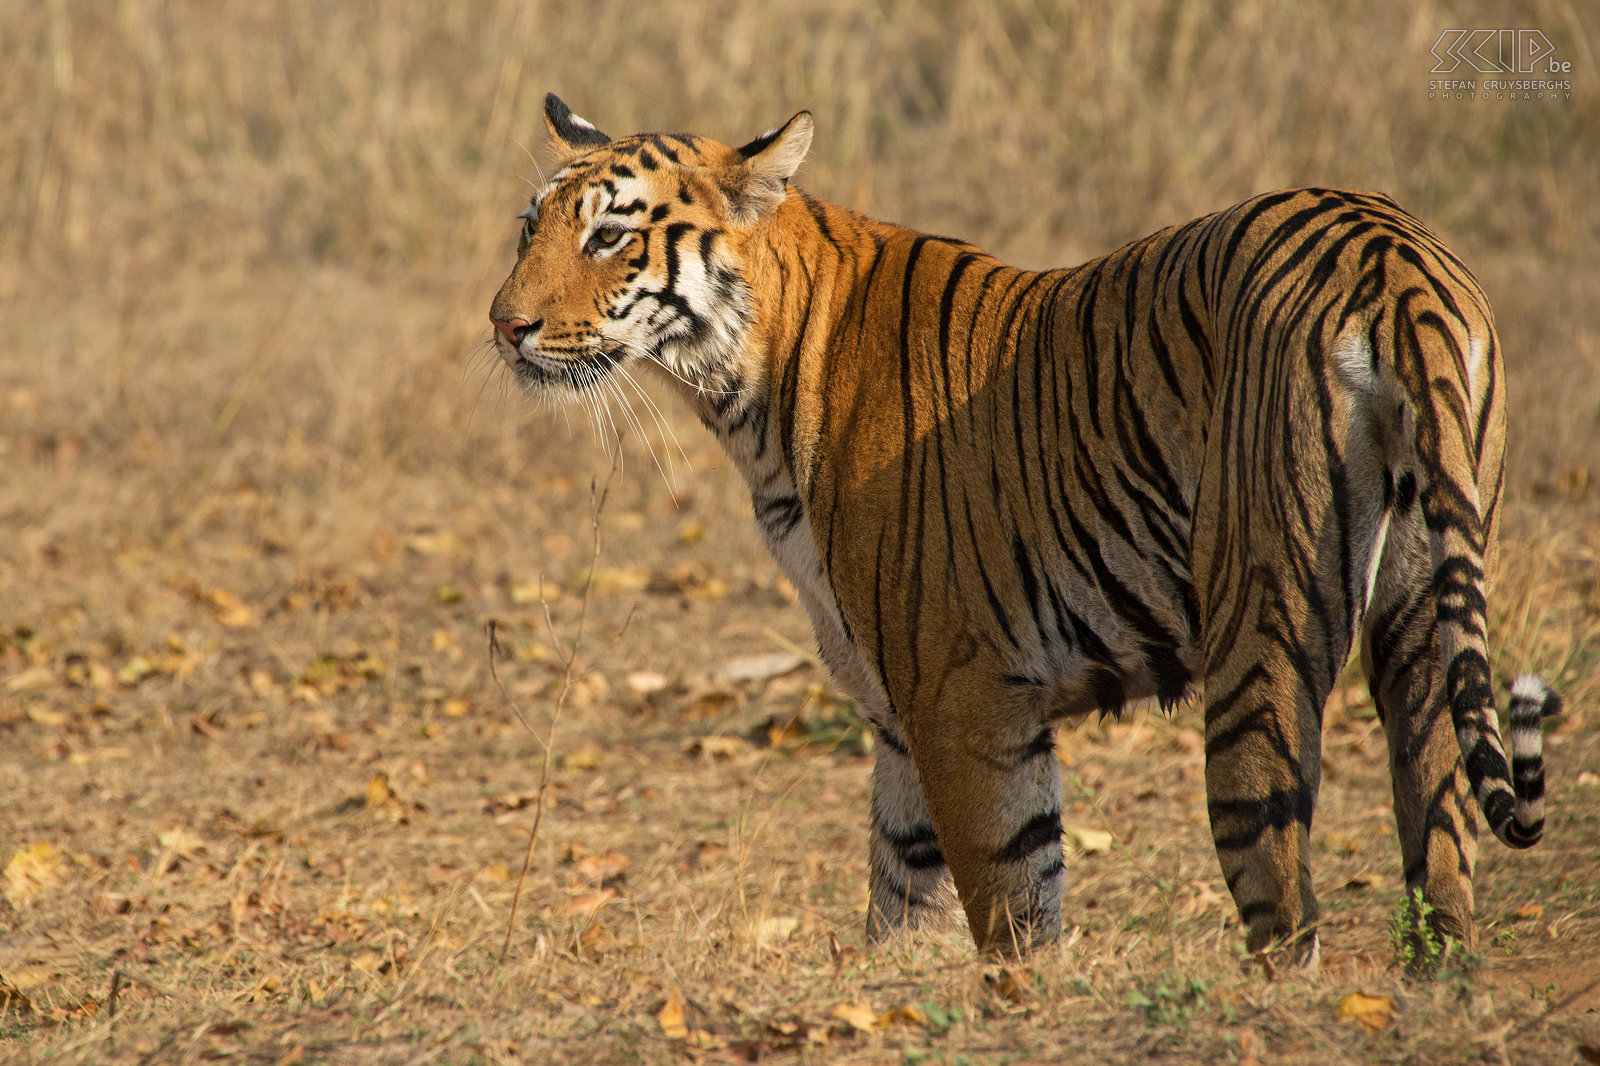 Tadoba - Tigress We saw the Bengal tigress walking away back into the jungle.<br />
<br />
At that time she was called P2 but a naturalist guide in Kabini told me recently that this tigress is now called Maya and she is the reigning queen of Pandharpauni (Tadoba). She had 2 cubs in 2013 and 3 cubs in 2015. Stefan Cruysberghs